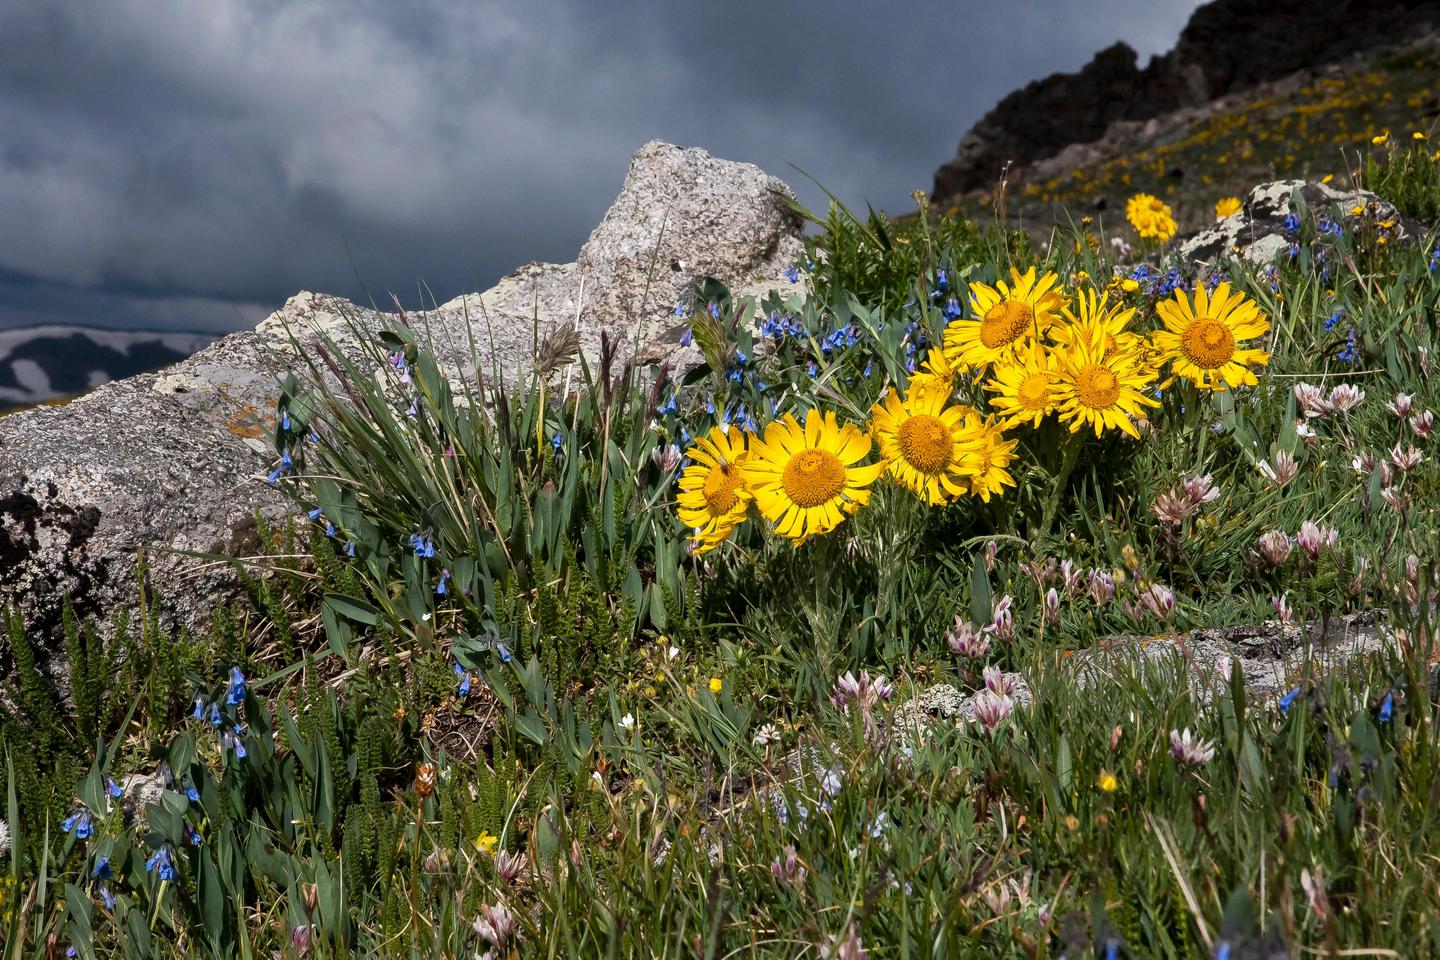 Summer in the RockiesAlpine sunflowers are growing on tundra